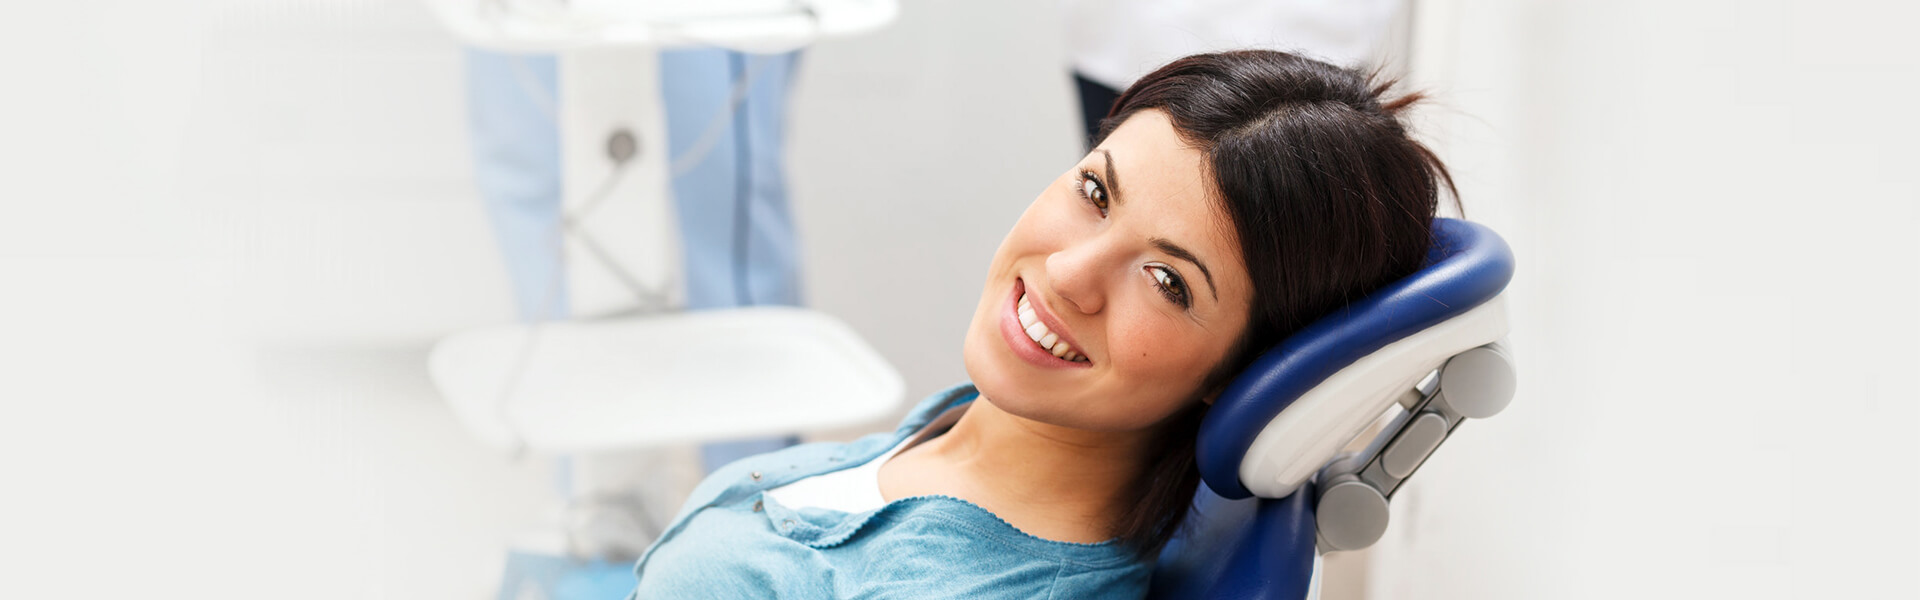 Endodontics and Root Canals in Mississauga, ON